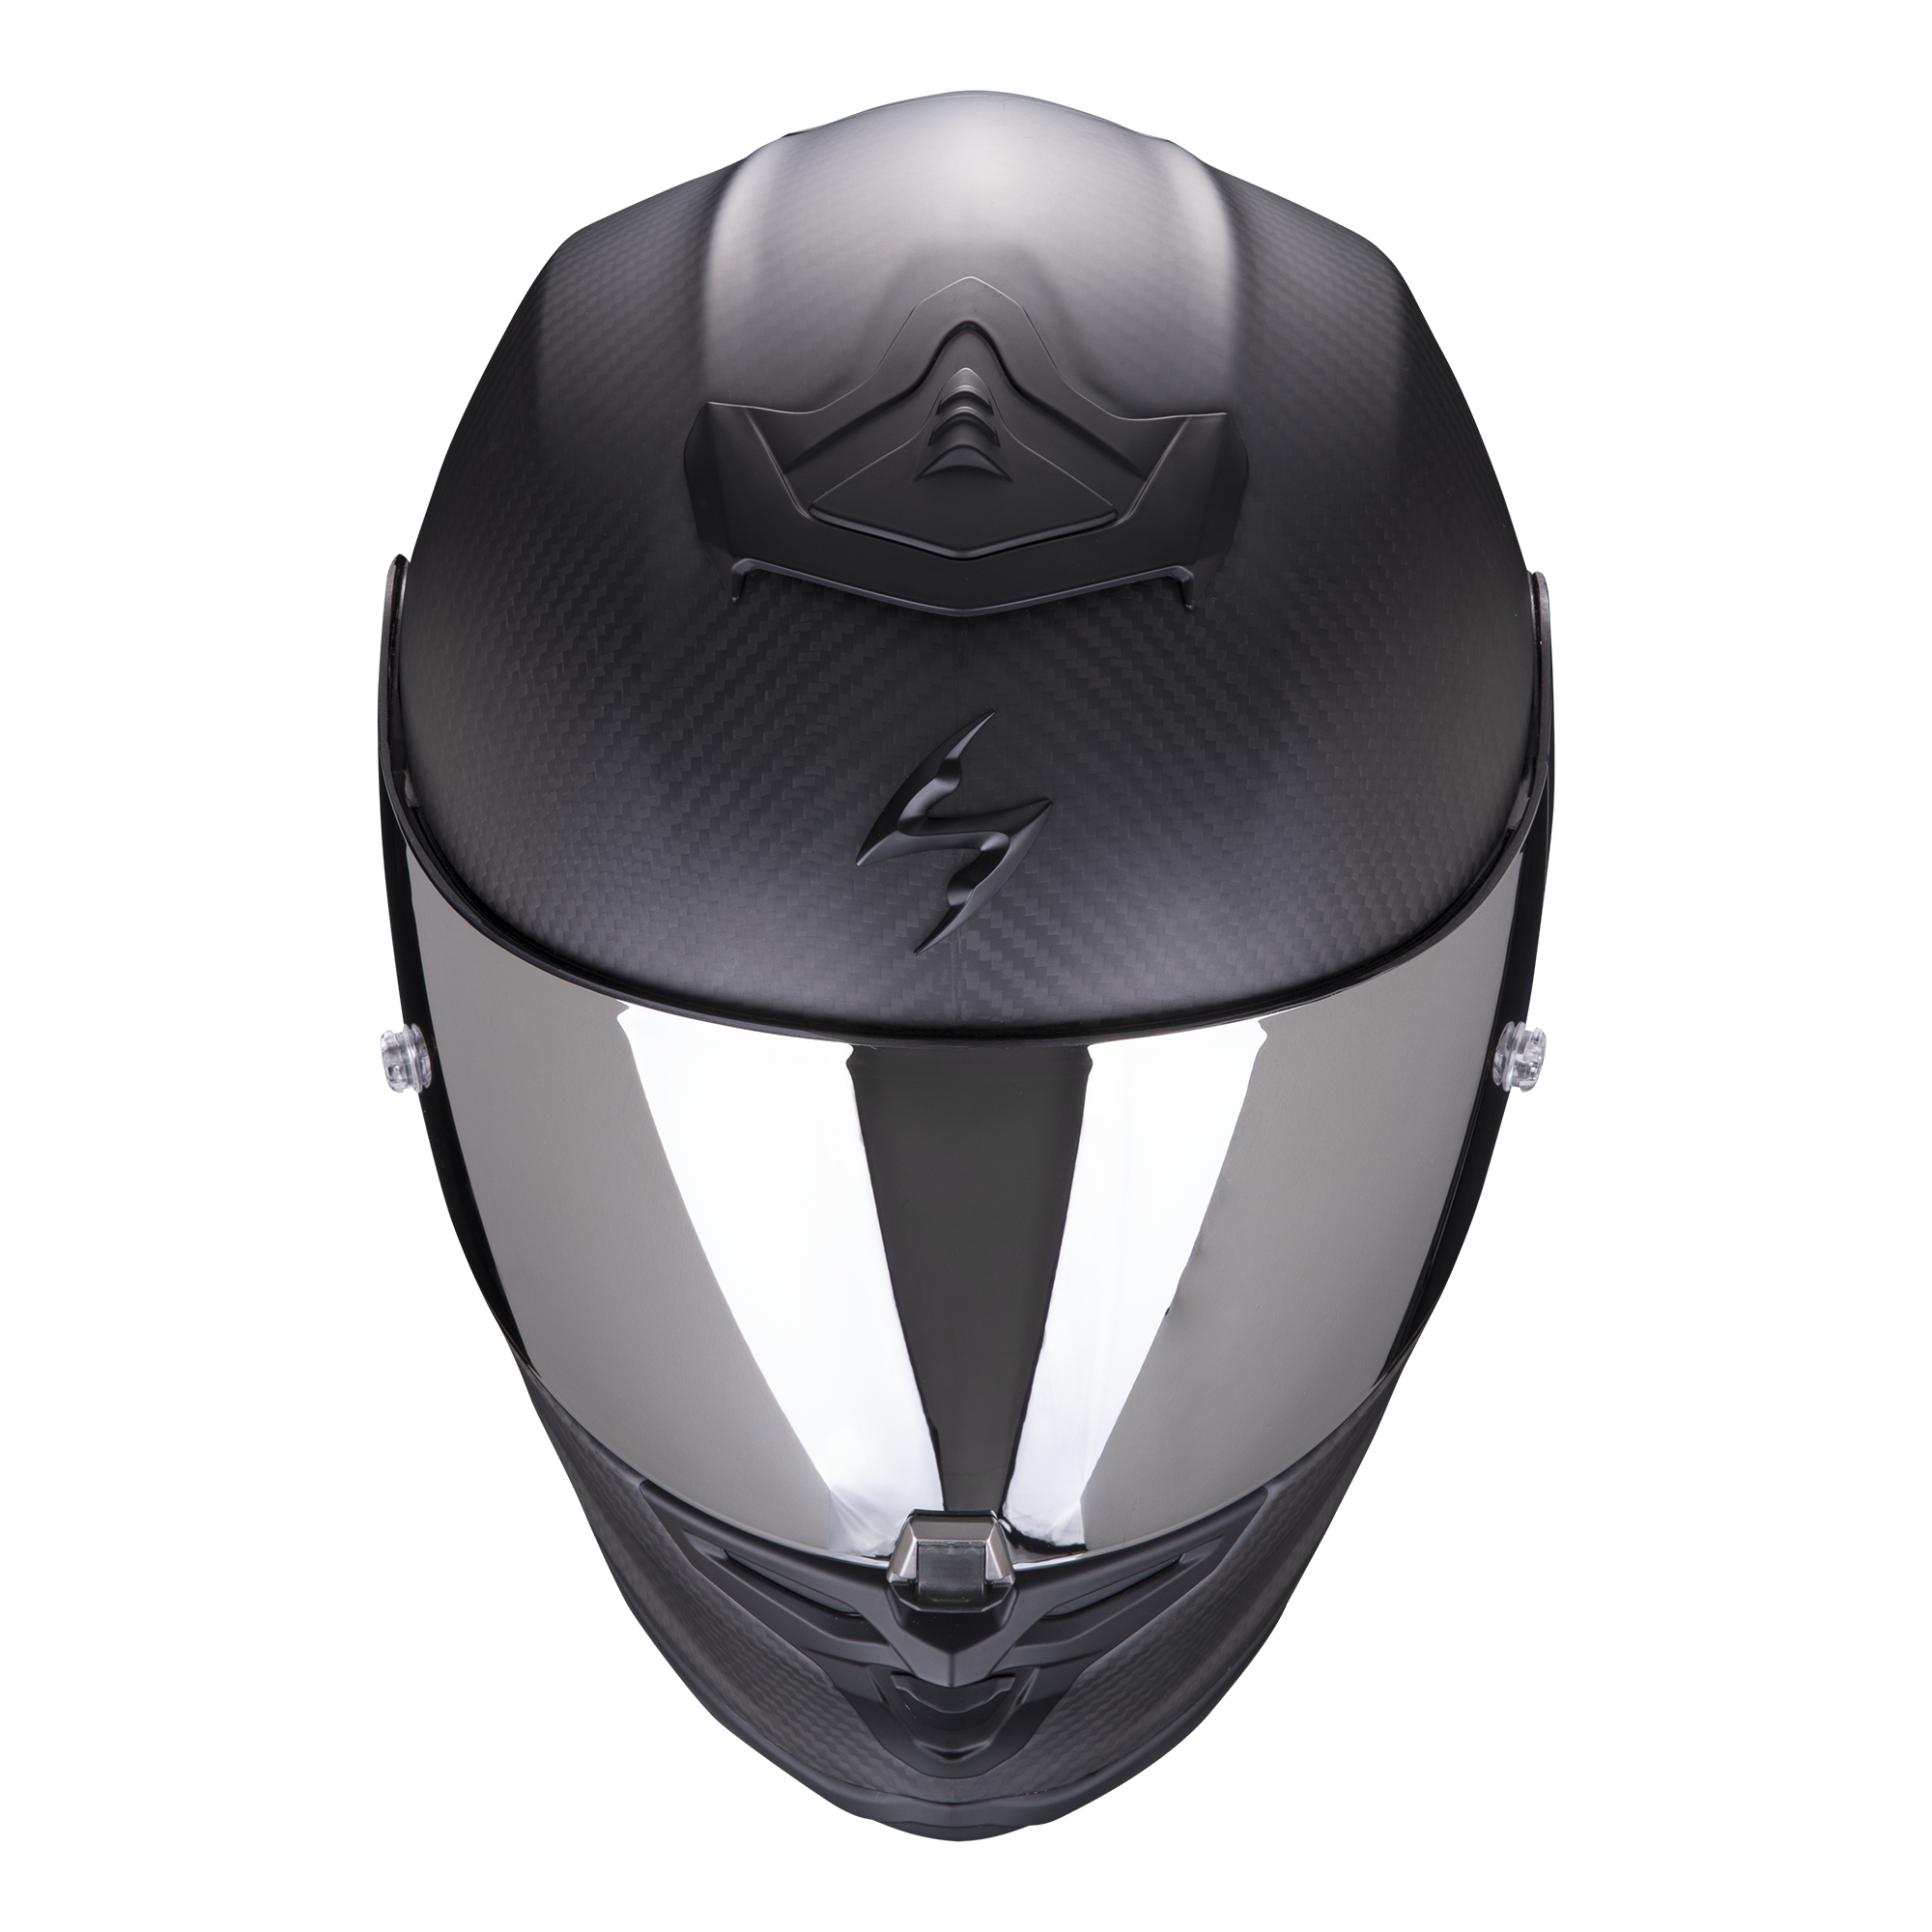 Scorpion Sports Europe : Premium Motorcycle Helmets – SCORPION EXO® is  factory owned by KIDO SPORTS®, one of the most experienced and respected  motorcycle helmet and apparel manufacturers in the world.